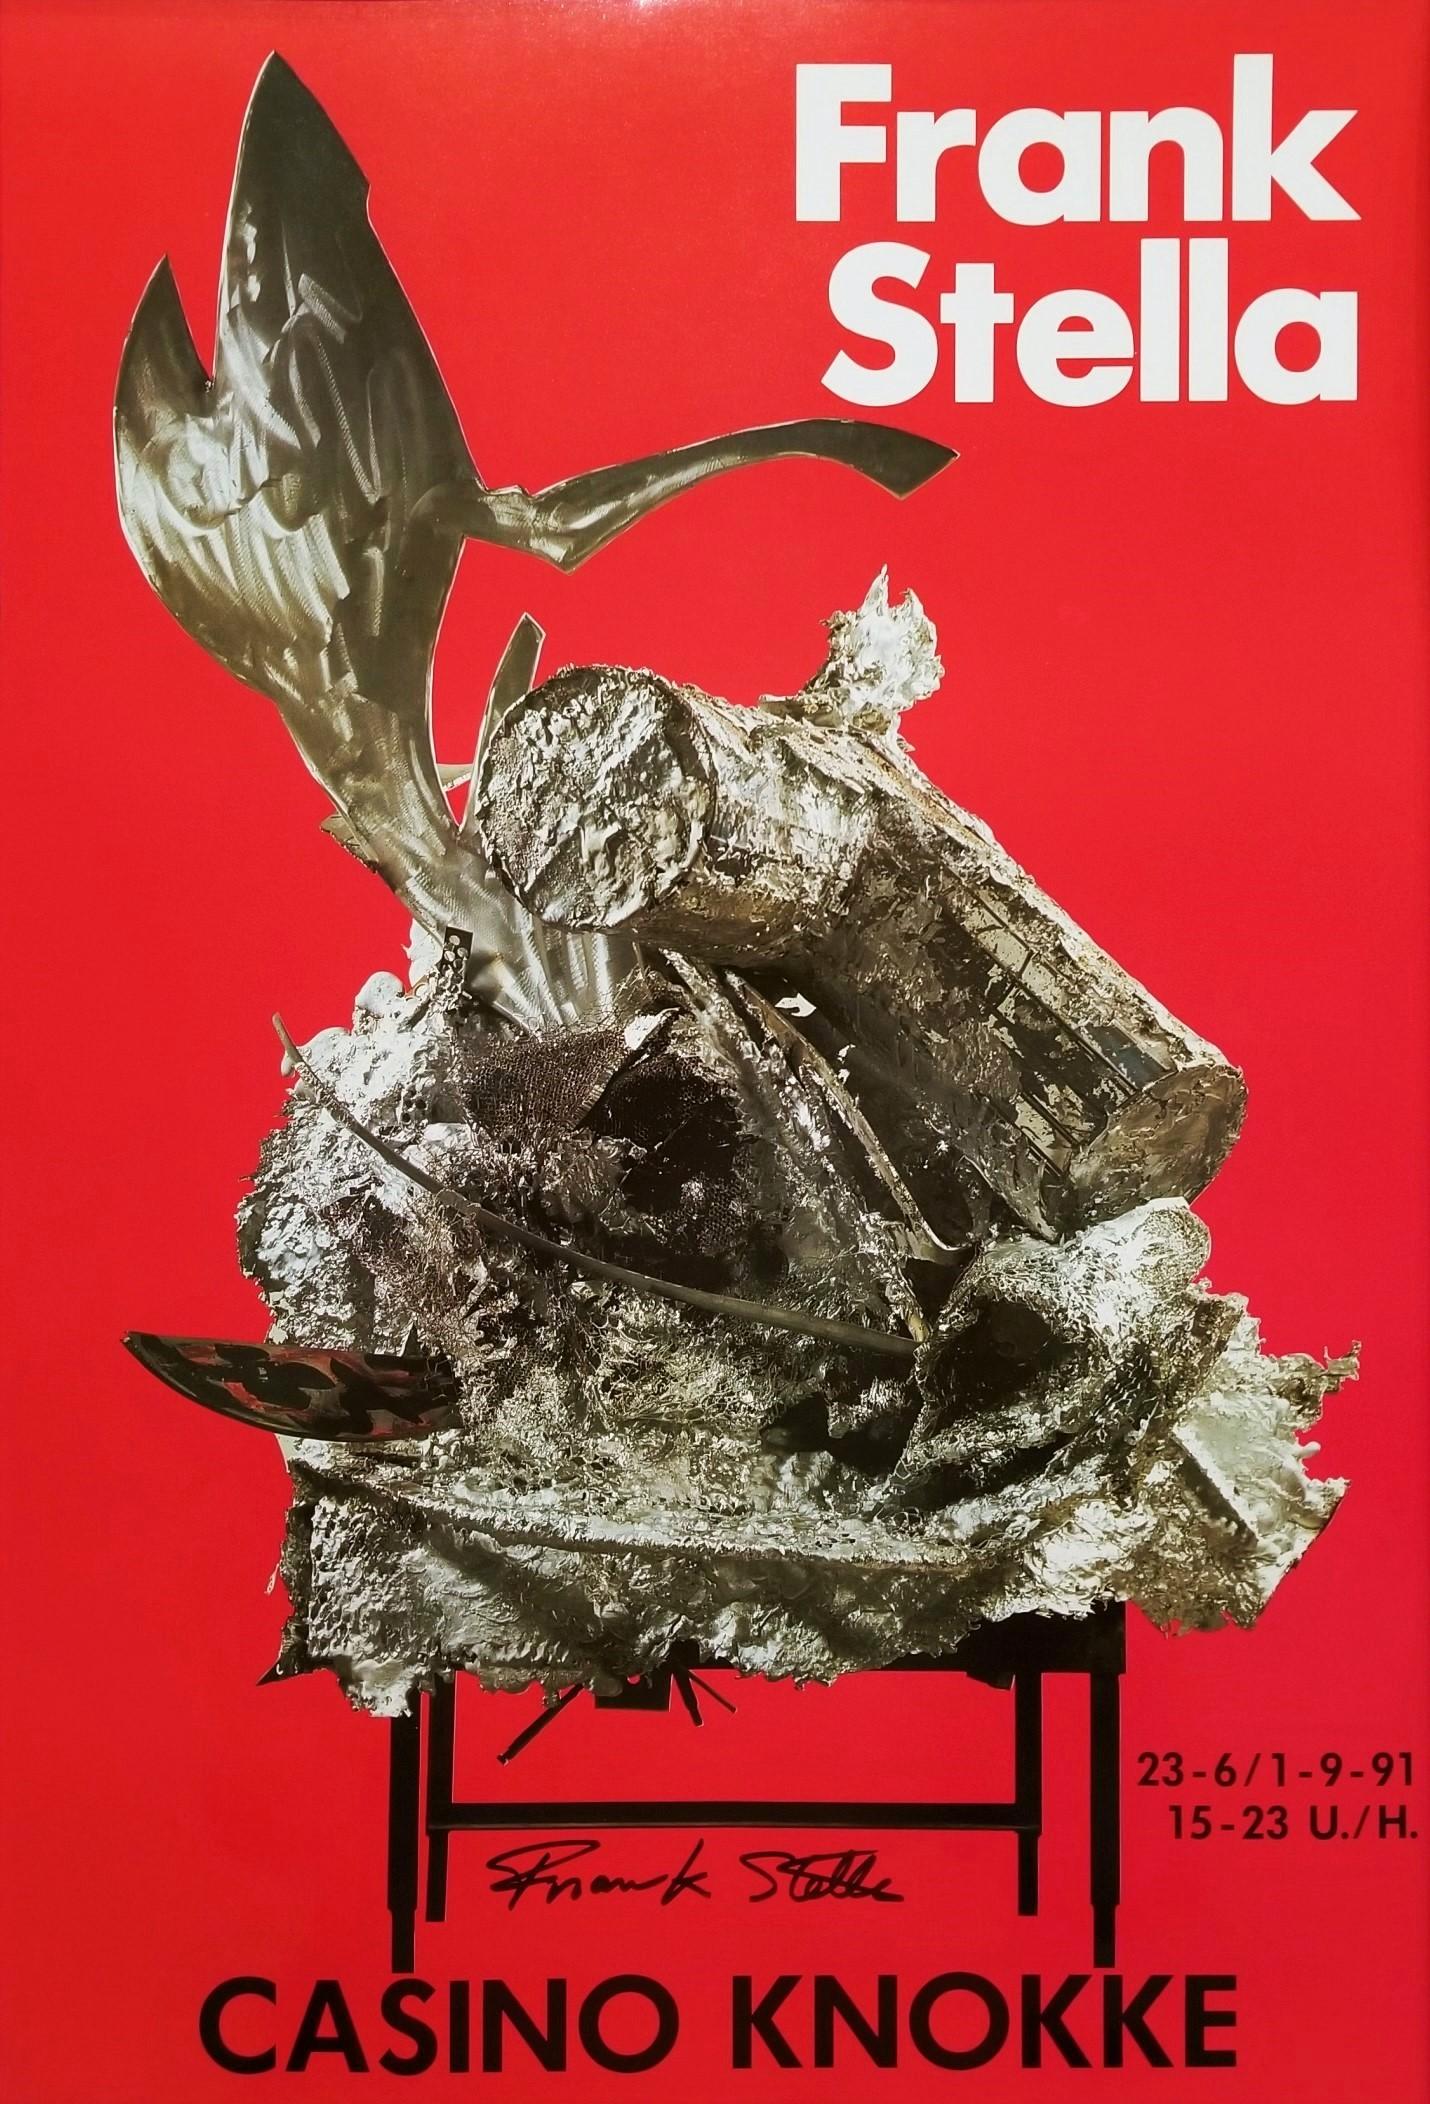 Casino Knokke Poster (signiert) /// Contemporary Abstract Sculpture Frank Stella